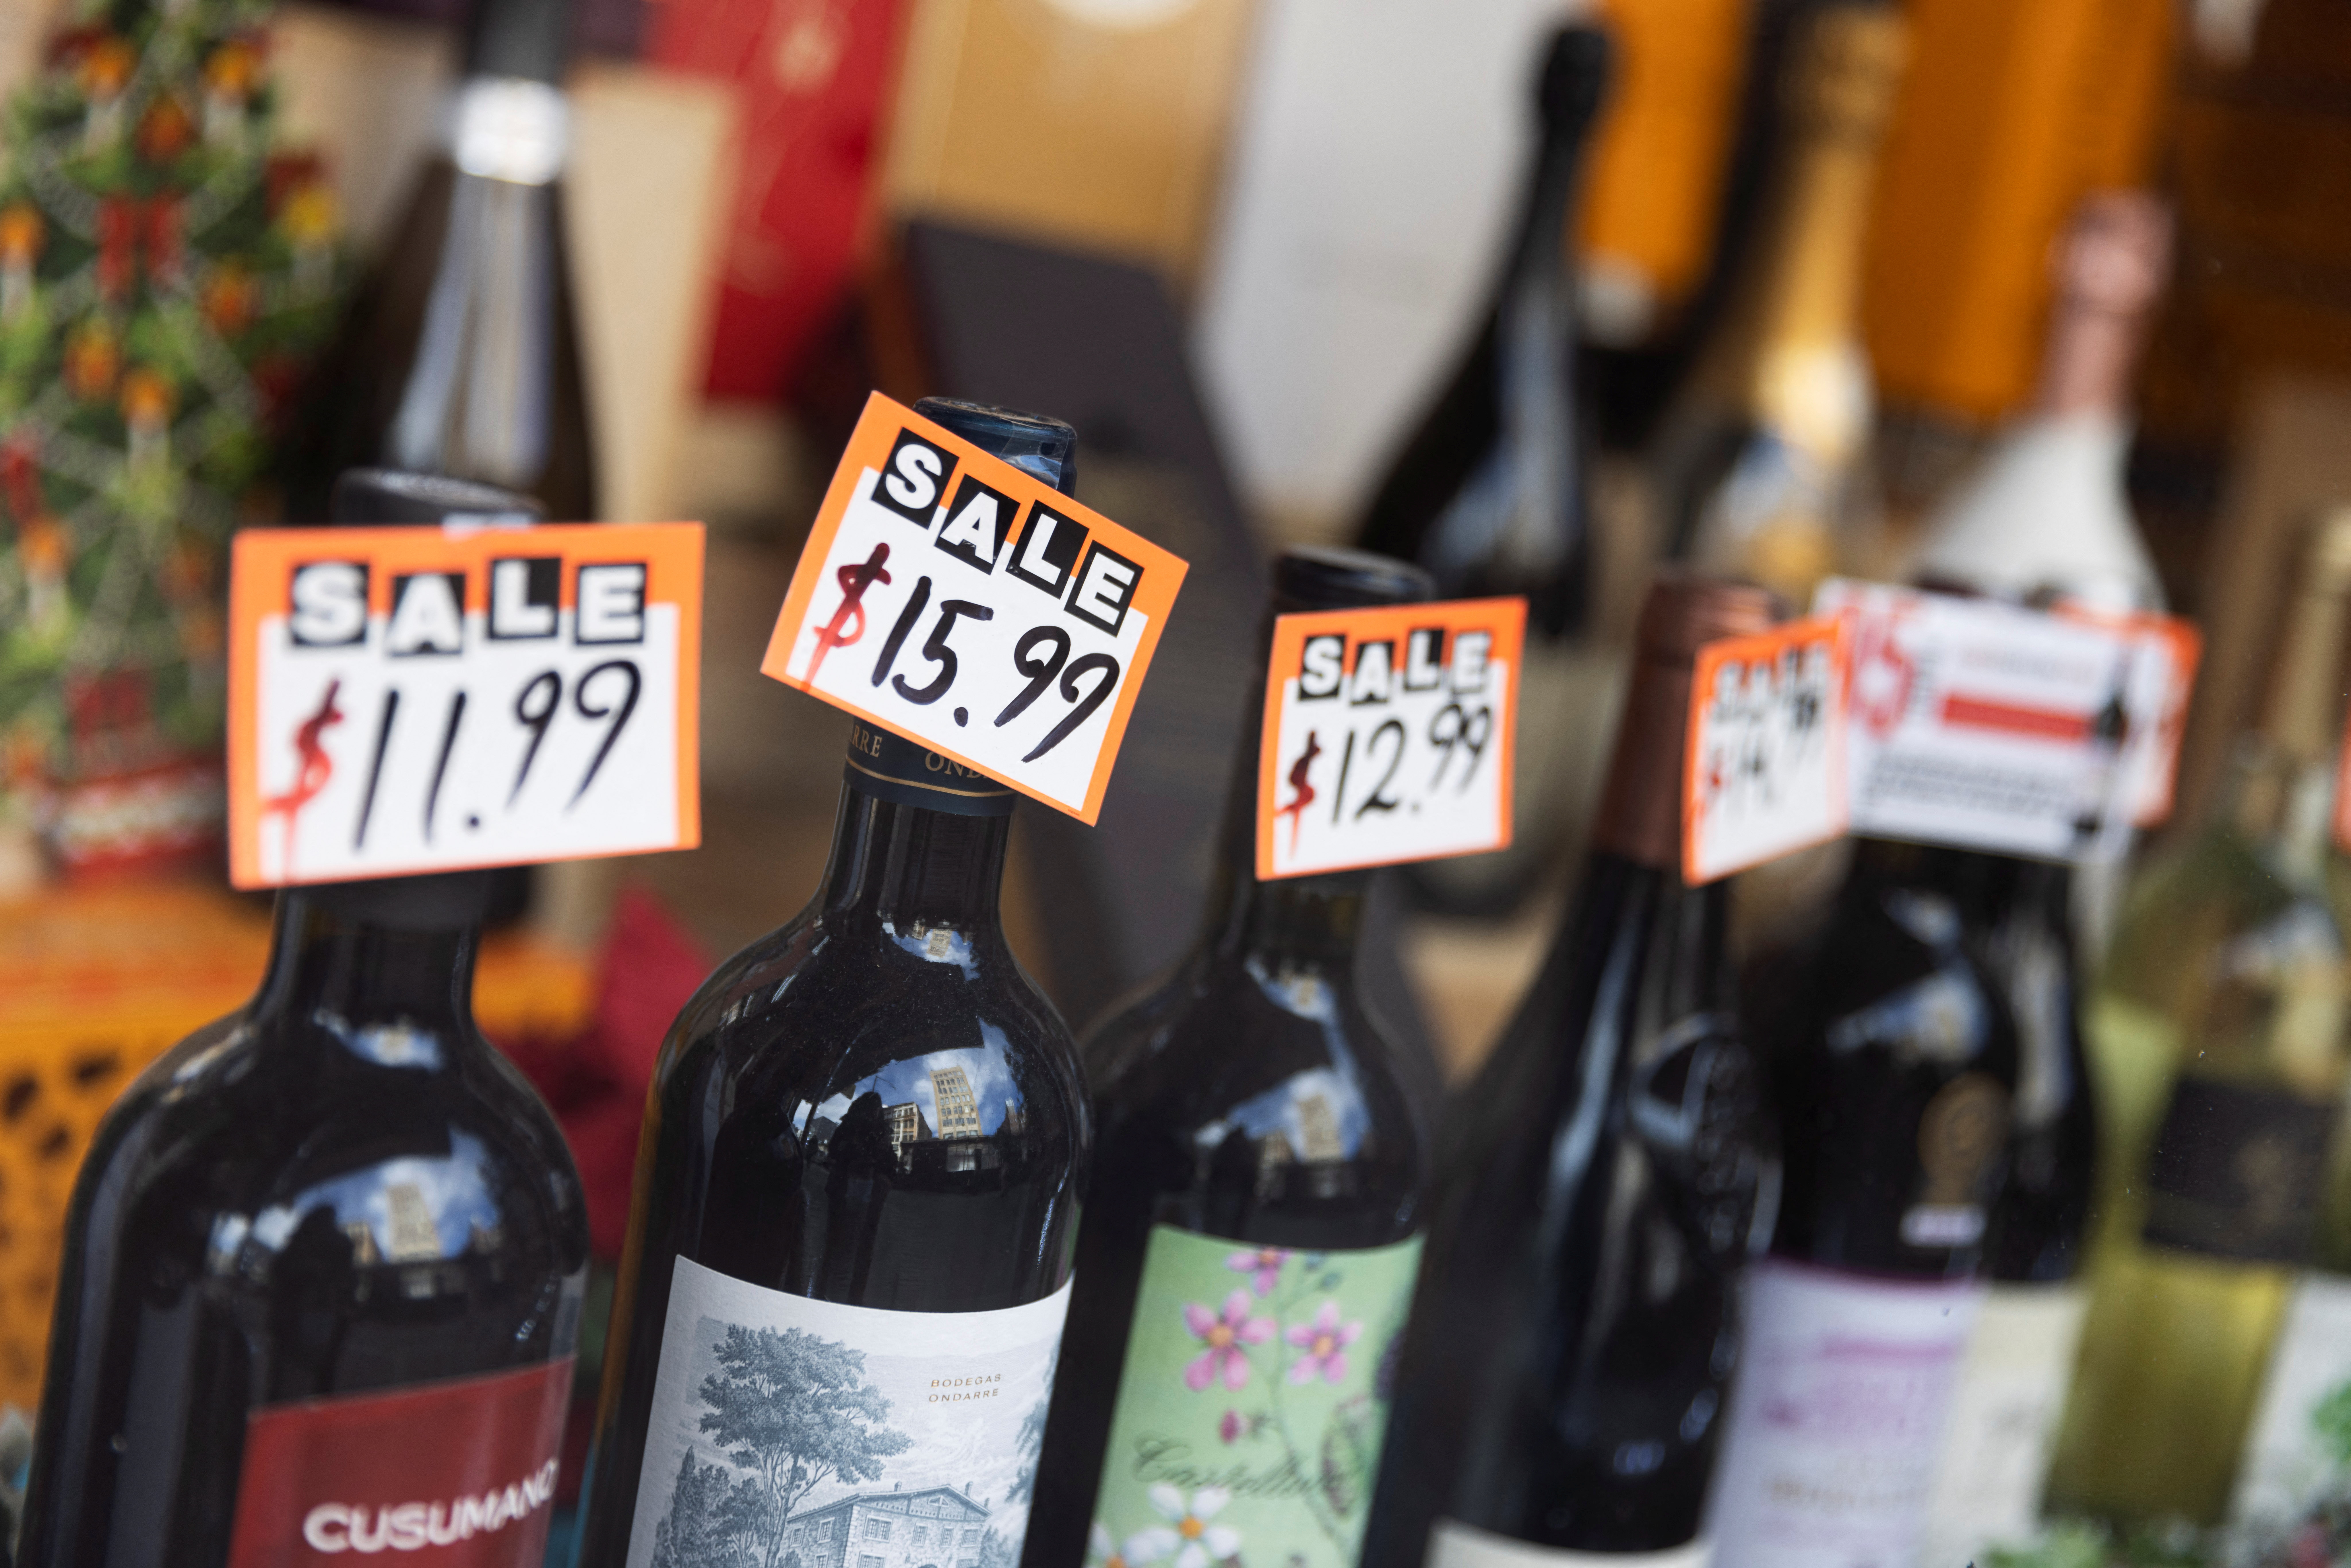 Prices are seen on wine bottles displayed in a store in Manhattan, New York City